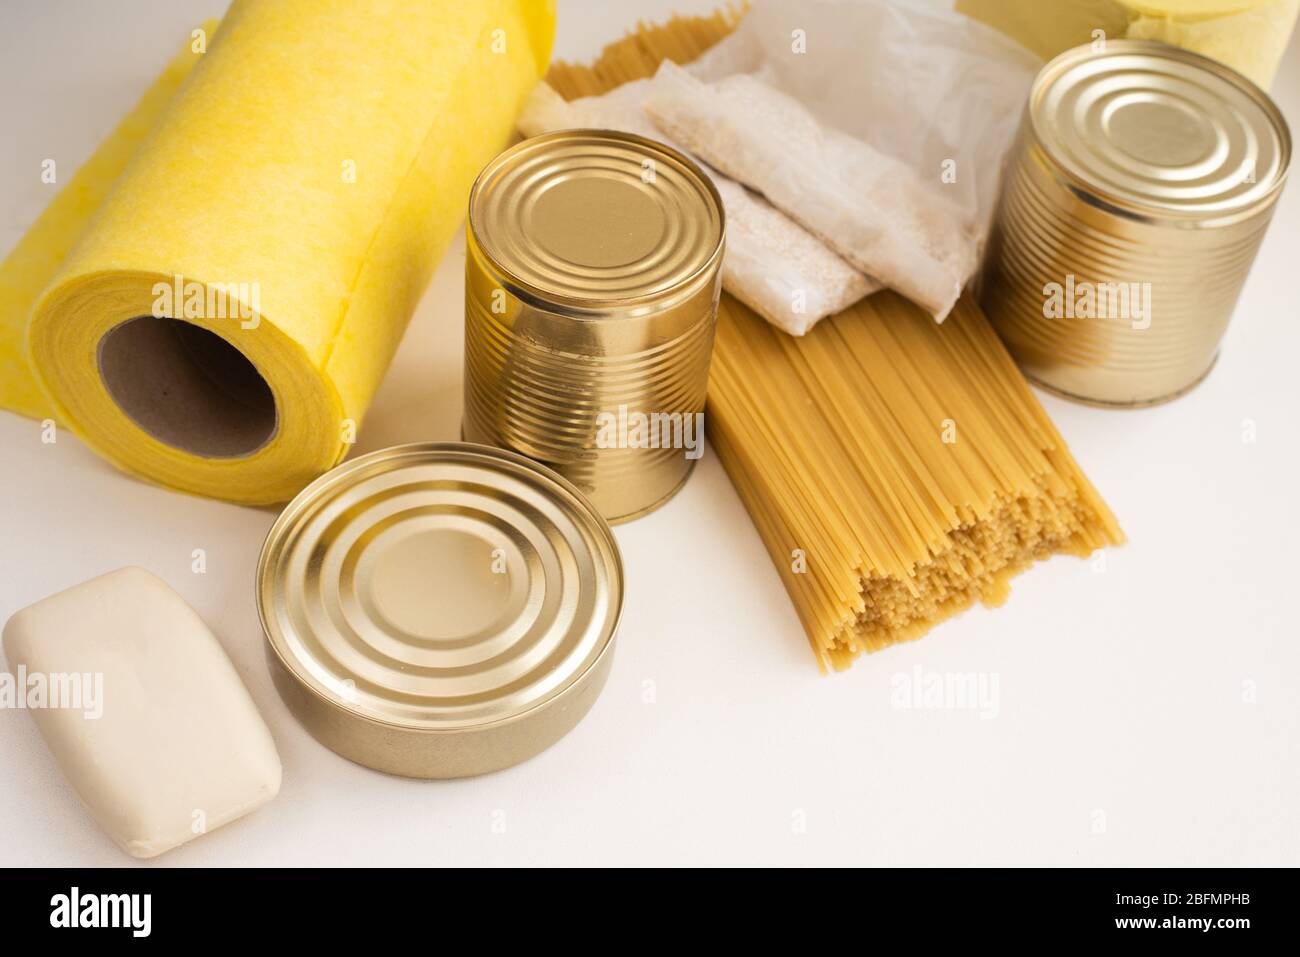 Cereals, various products, canned food, pasta and soap with place for text. Humanitarian assistance during the coronavirus pandemic. Stock Photo